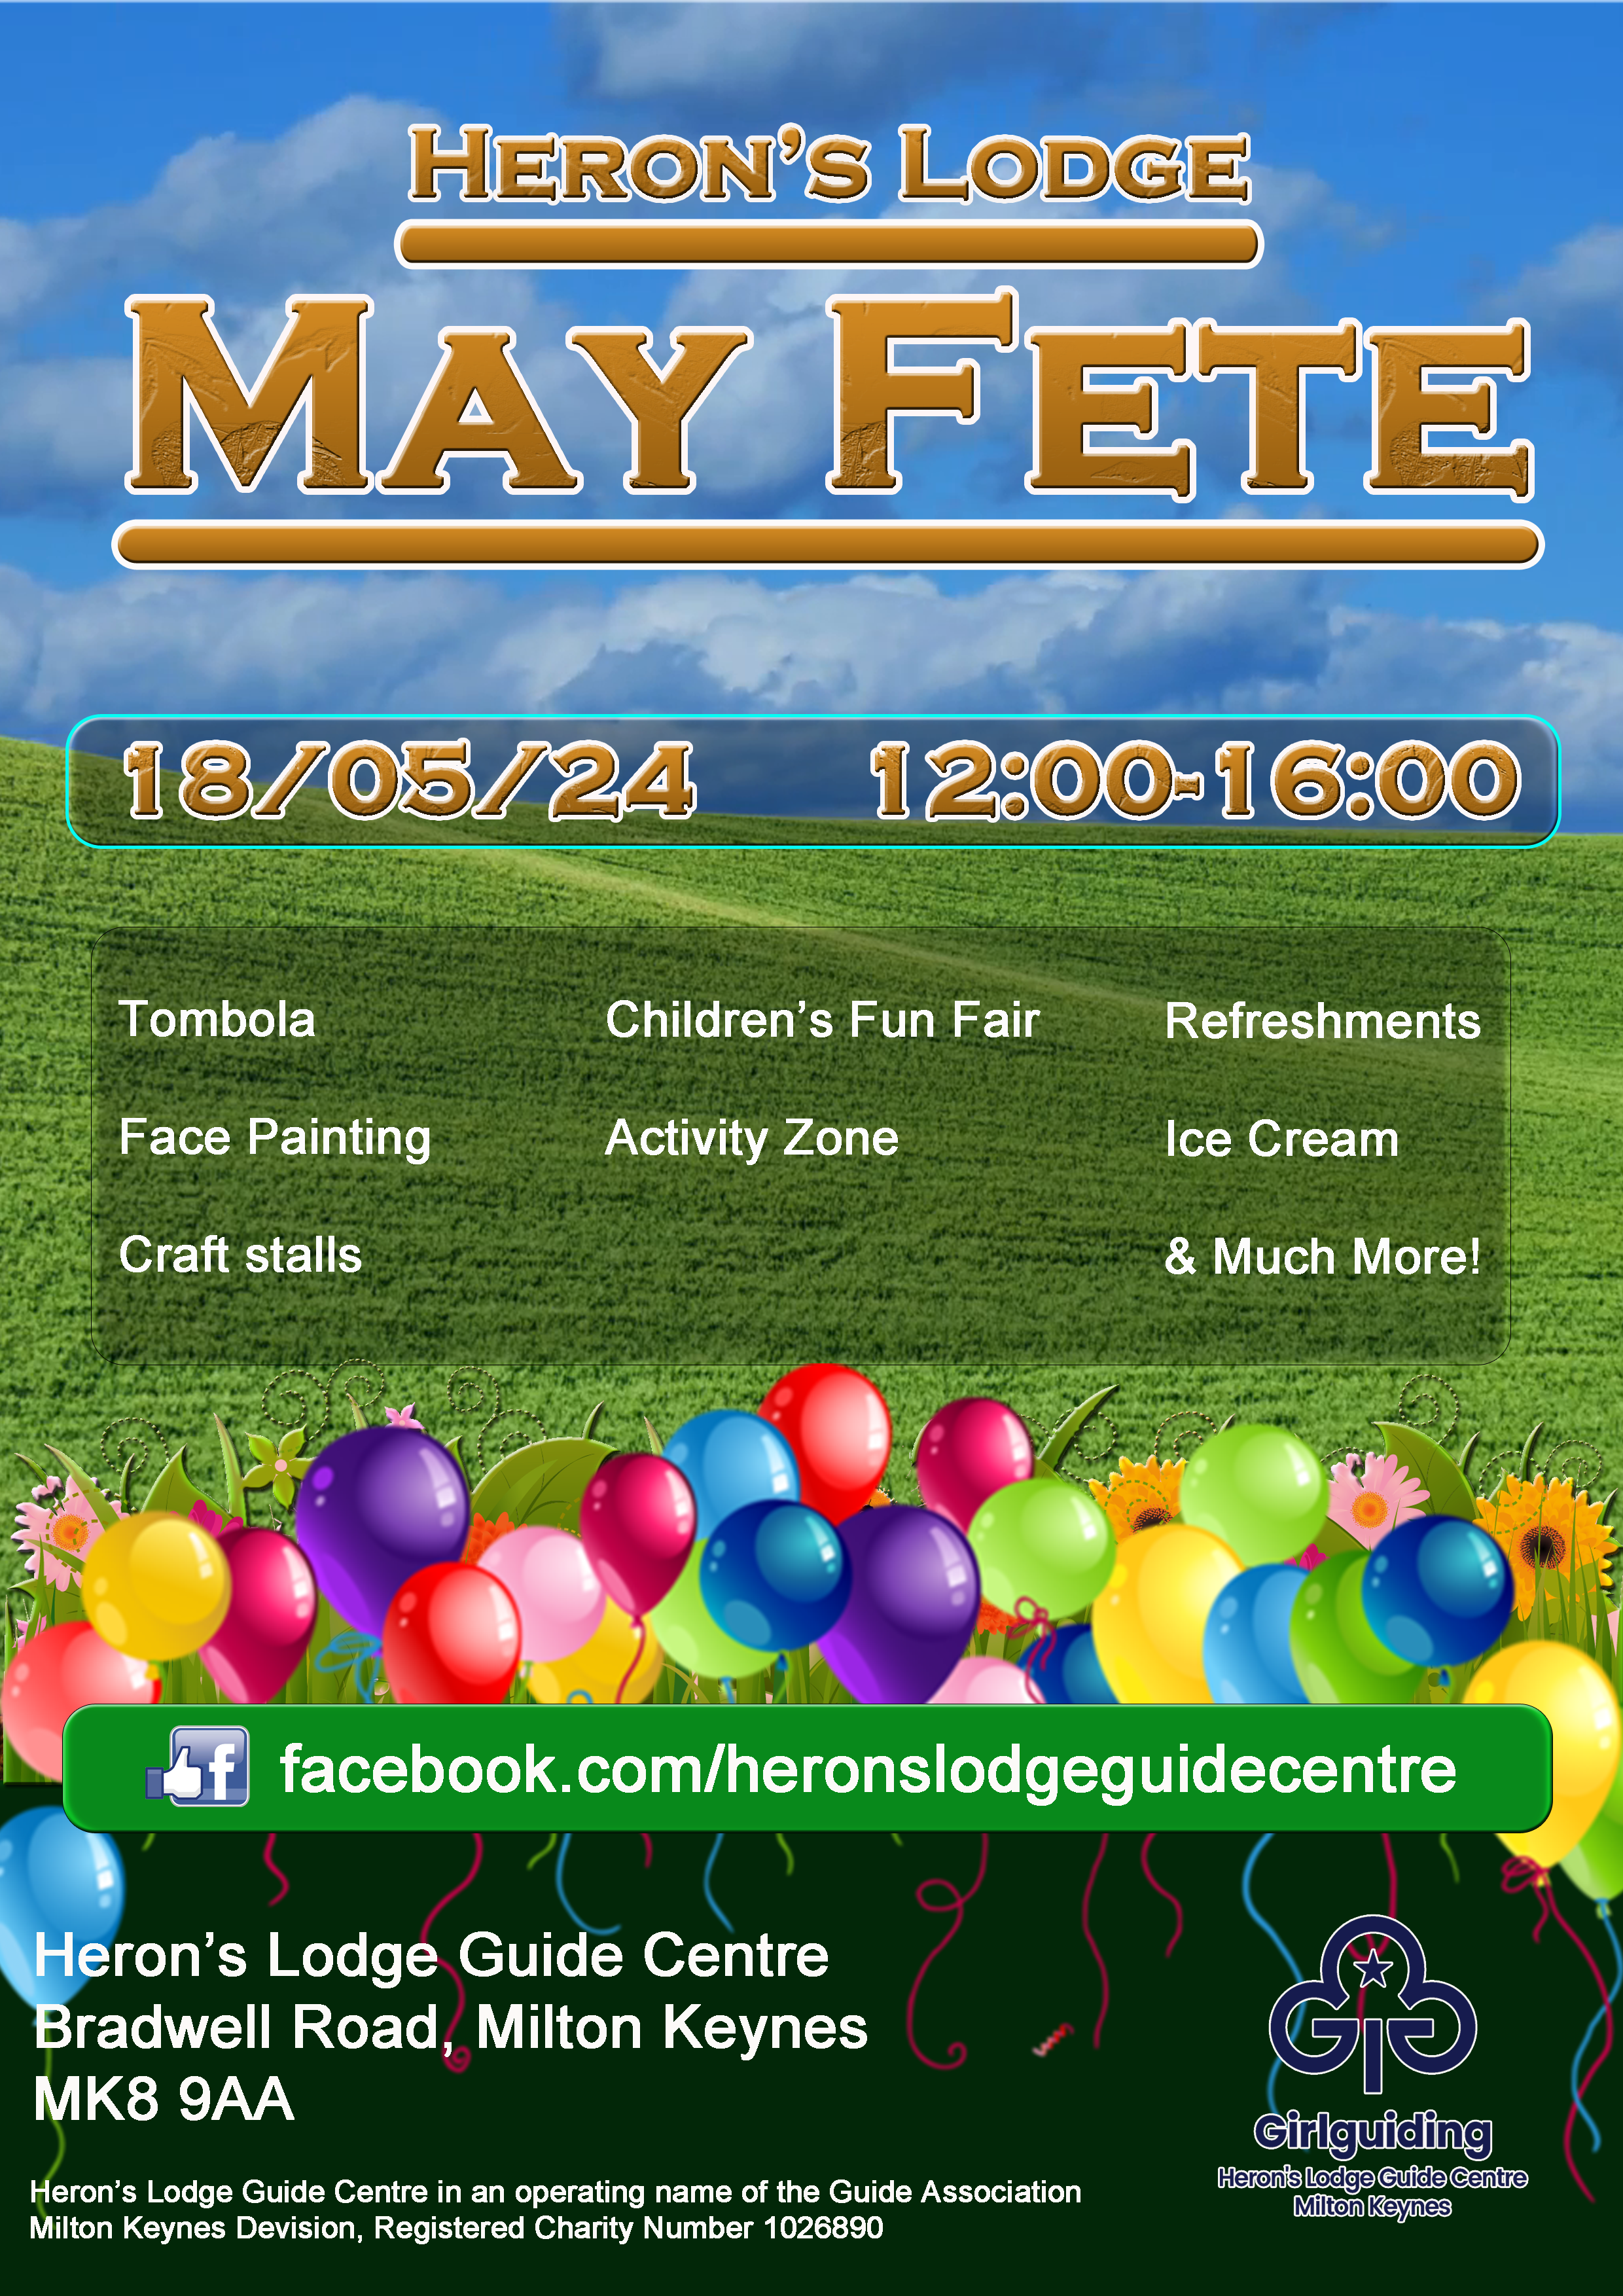 Heron’s Lodge Guide Centre – May Fete Top Image